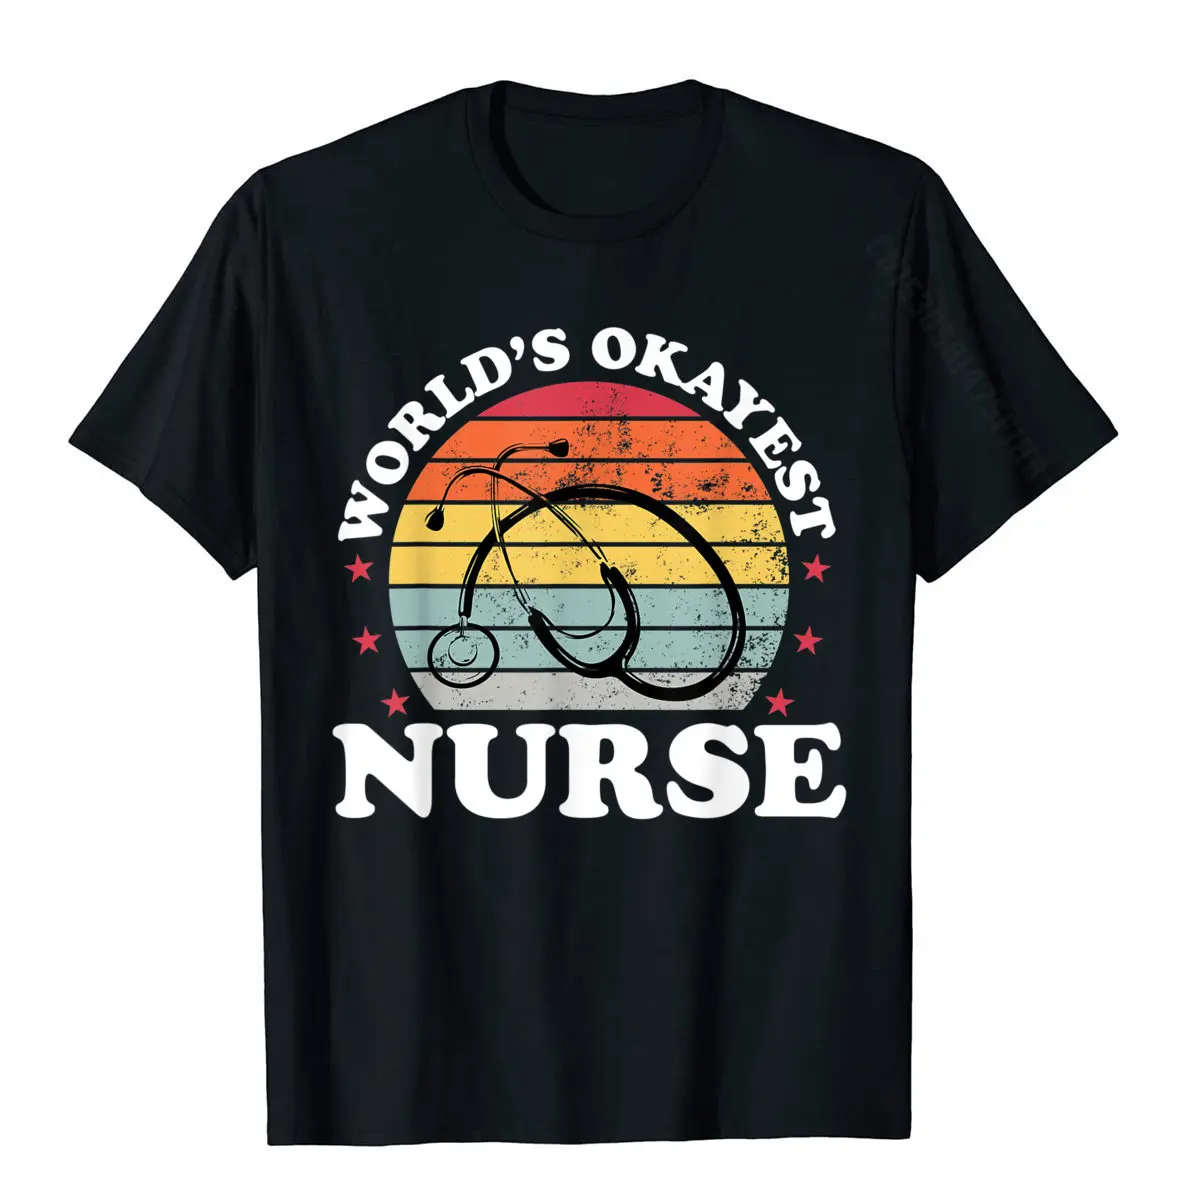 

Worlds Okayest Nurse Women Nursing Funny RN LPN Medical Gift T-Shirt Tops Shirts For Students Funky Cotton T Shirt Printing